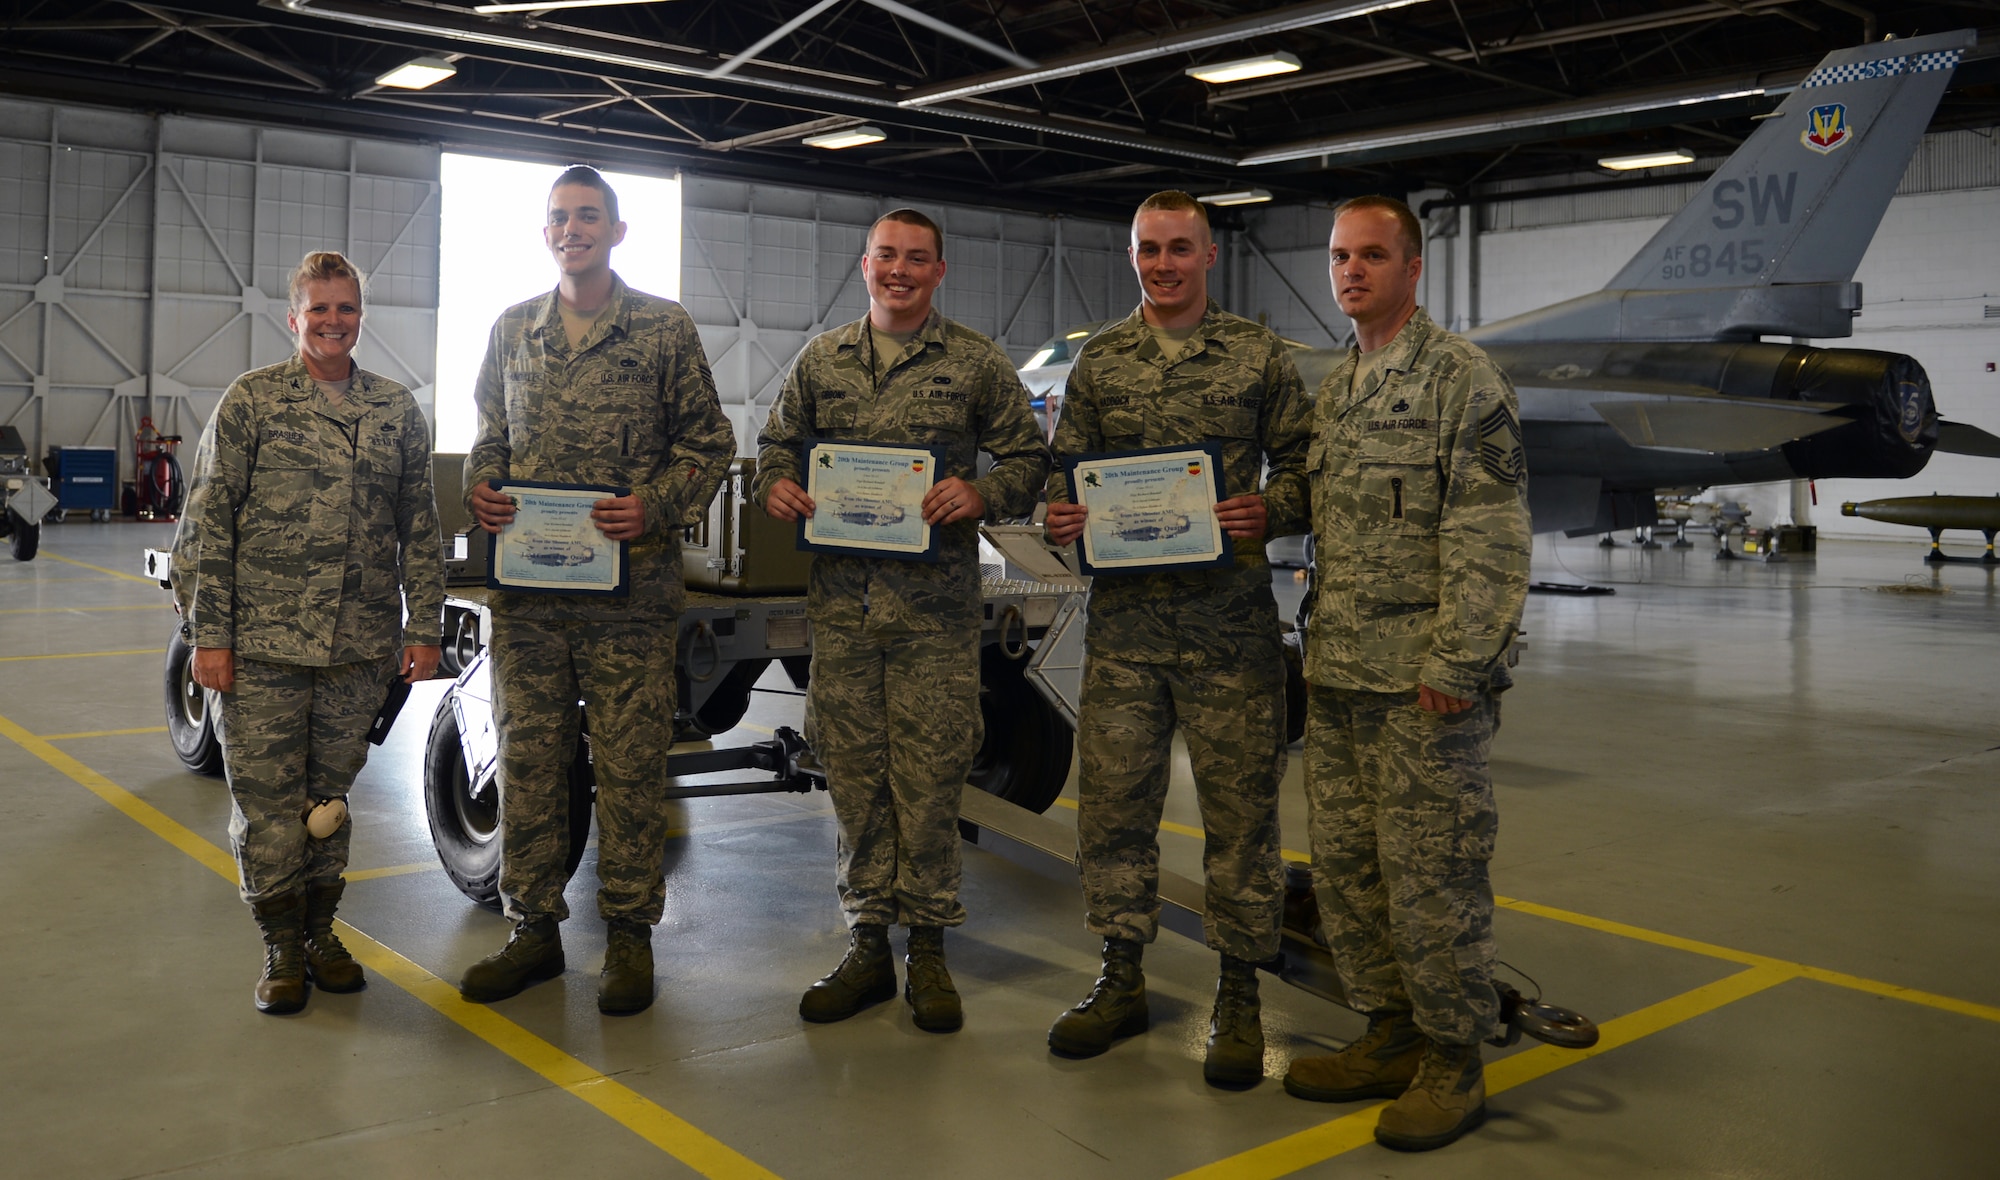 U.S. Air Force Col. Helen Brasher, 20th Maintenance Group commander, and Chief Master Sgt. Anthony Bomar, 20th MXG wing weapons manager, present
Staff Sgt. Richard Randall, 55th Aircraft Maintenance Unit ?Shooters,? weapons load crew chief, Senior Airman Jacob Gibbons, 55th AMU ?Shooters,? weapons load crew member, and Senior Airman Dylan Haddock, 55th AMU ?Shooters,? weapons load crew member, winners of the Weapons Load Competition of the Quarter certificates at Shaw Air Force Base, S.C., April 12, 2013. The 55th AMU ?Shooters? and 79th AMU ?Tigers? competed against one another during the Weapons Load Crew of the Quarter. (U.S. Air Force photo by Senior Airman Tabatha Zarrella/Released)
